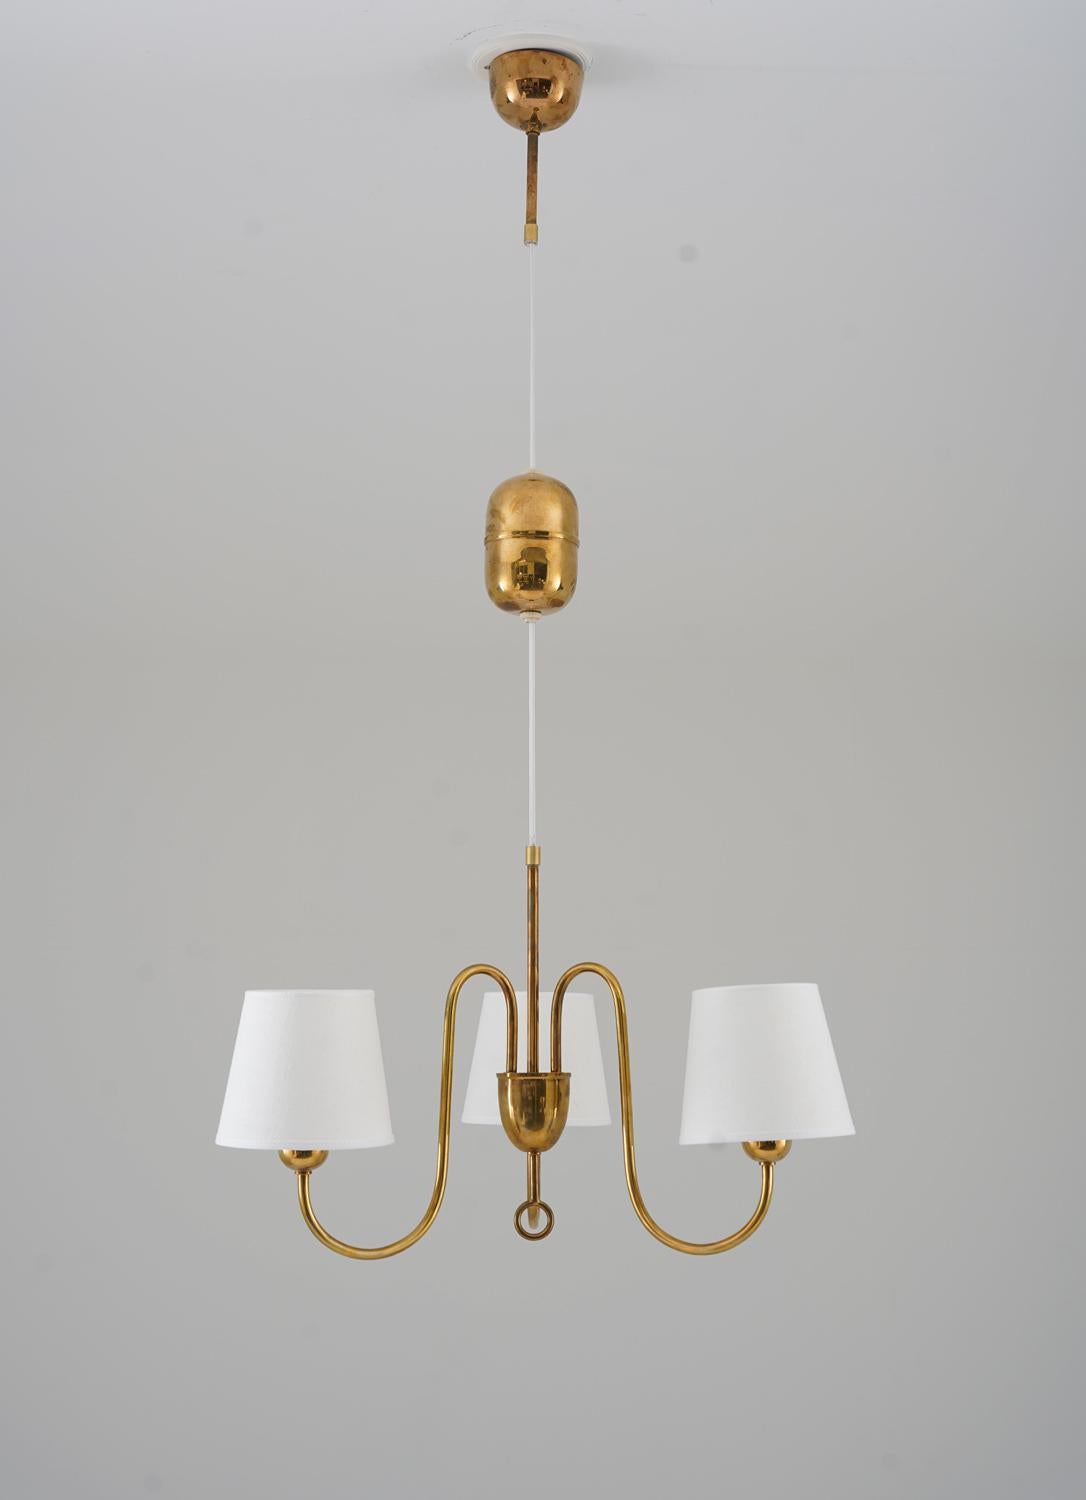 Beautiful pendant in brass with adjustable height, manufactured in Sweden, 1940s.
This pendant features three light sources, hidden by fabric shades (new). The shades are connected to a center piece, where the brass rod, holding the lamp, is